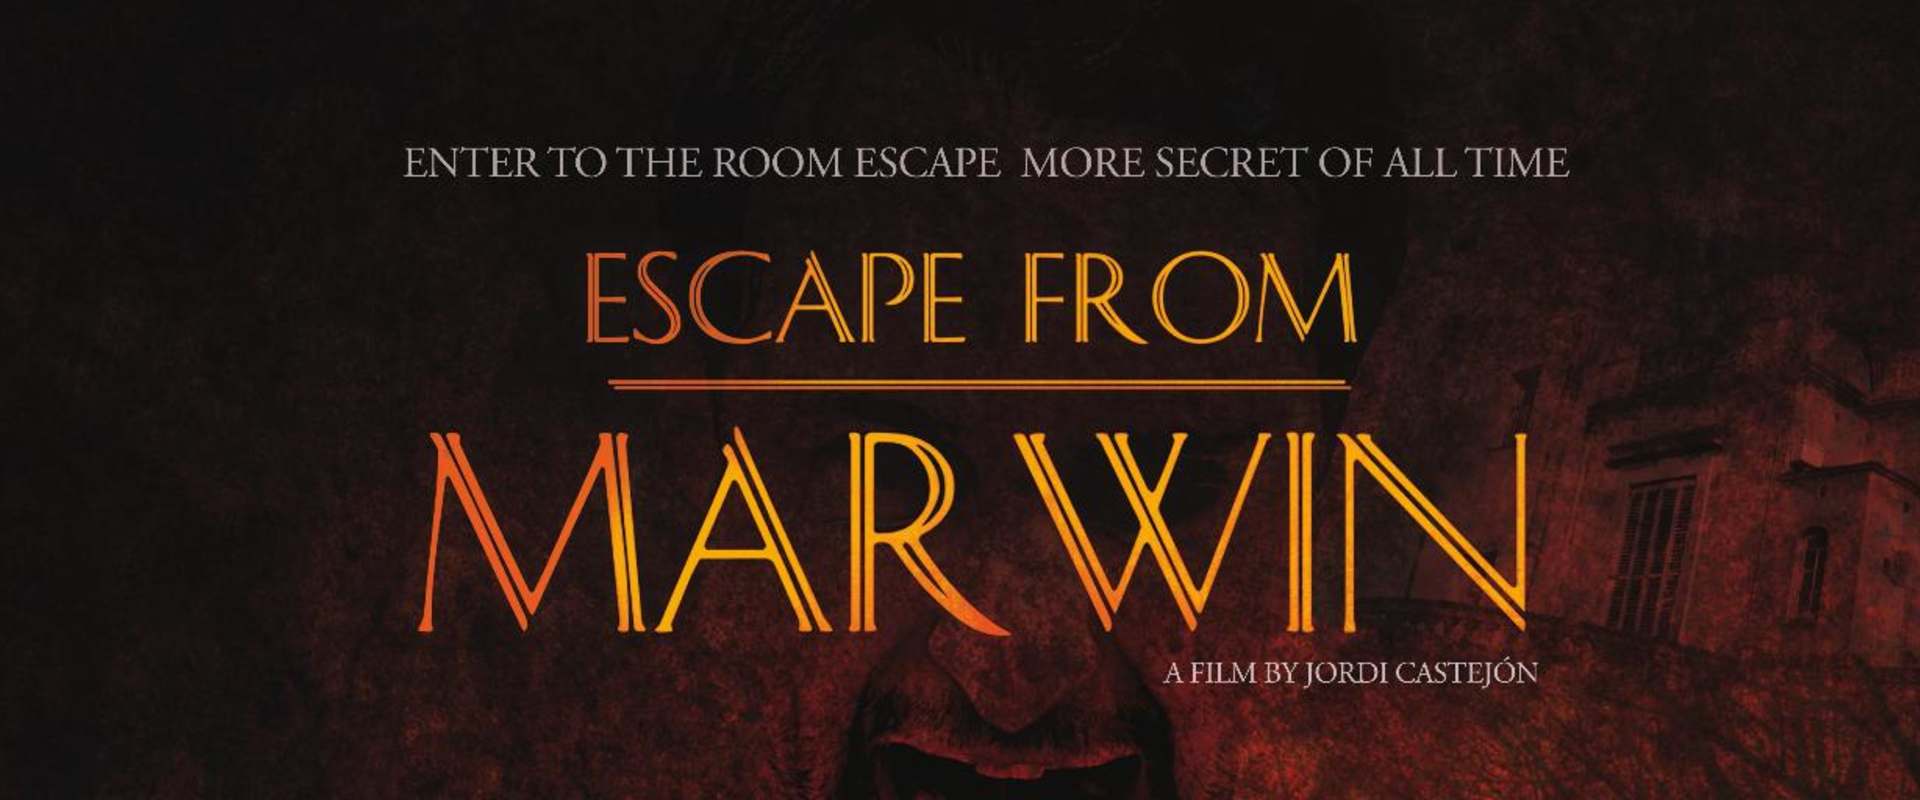 Escape from Marwin background 1